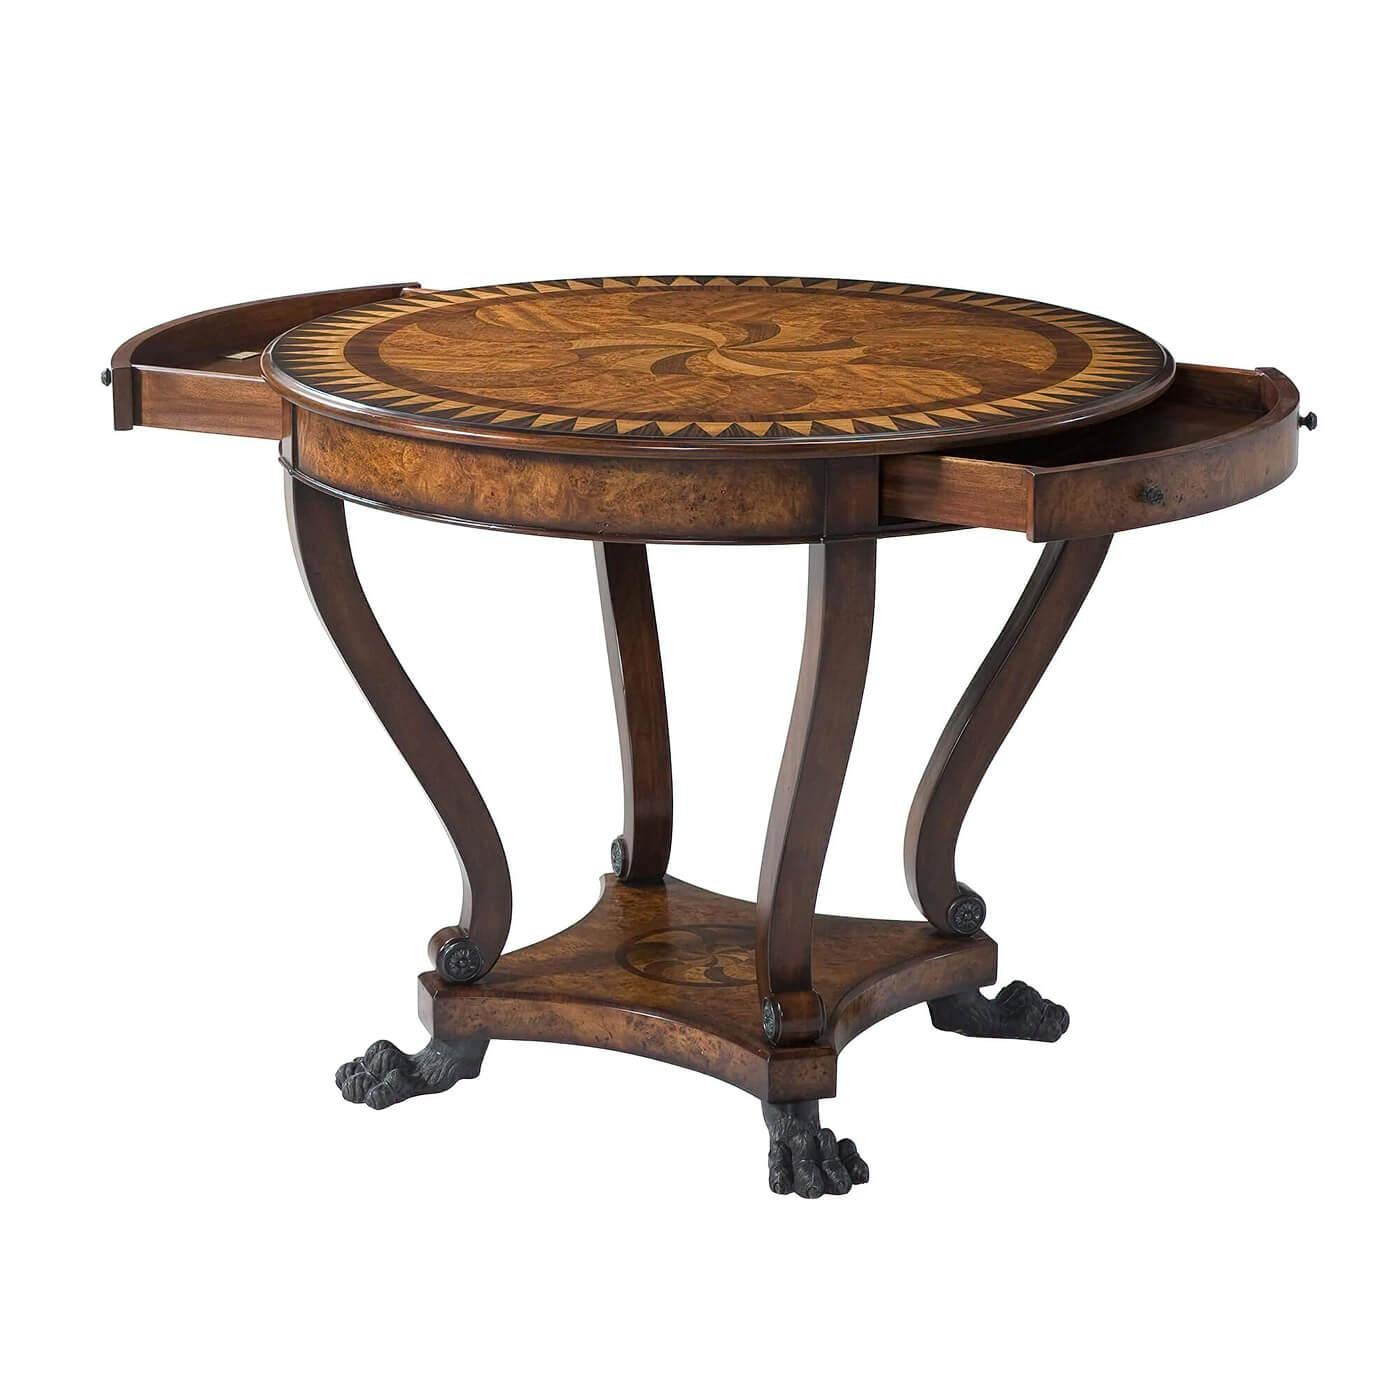 A Regency style marquetry hand-inlaid center table, the circular top with swirling hand inlay in rosewood and burl veneers with sunburst parquetry crossbanding, above two bowed frieze drawers, on inswept supports with scroll feet applied with brass